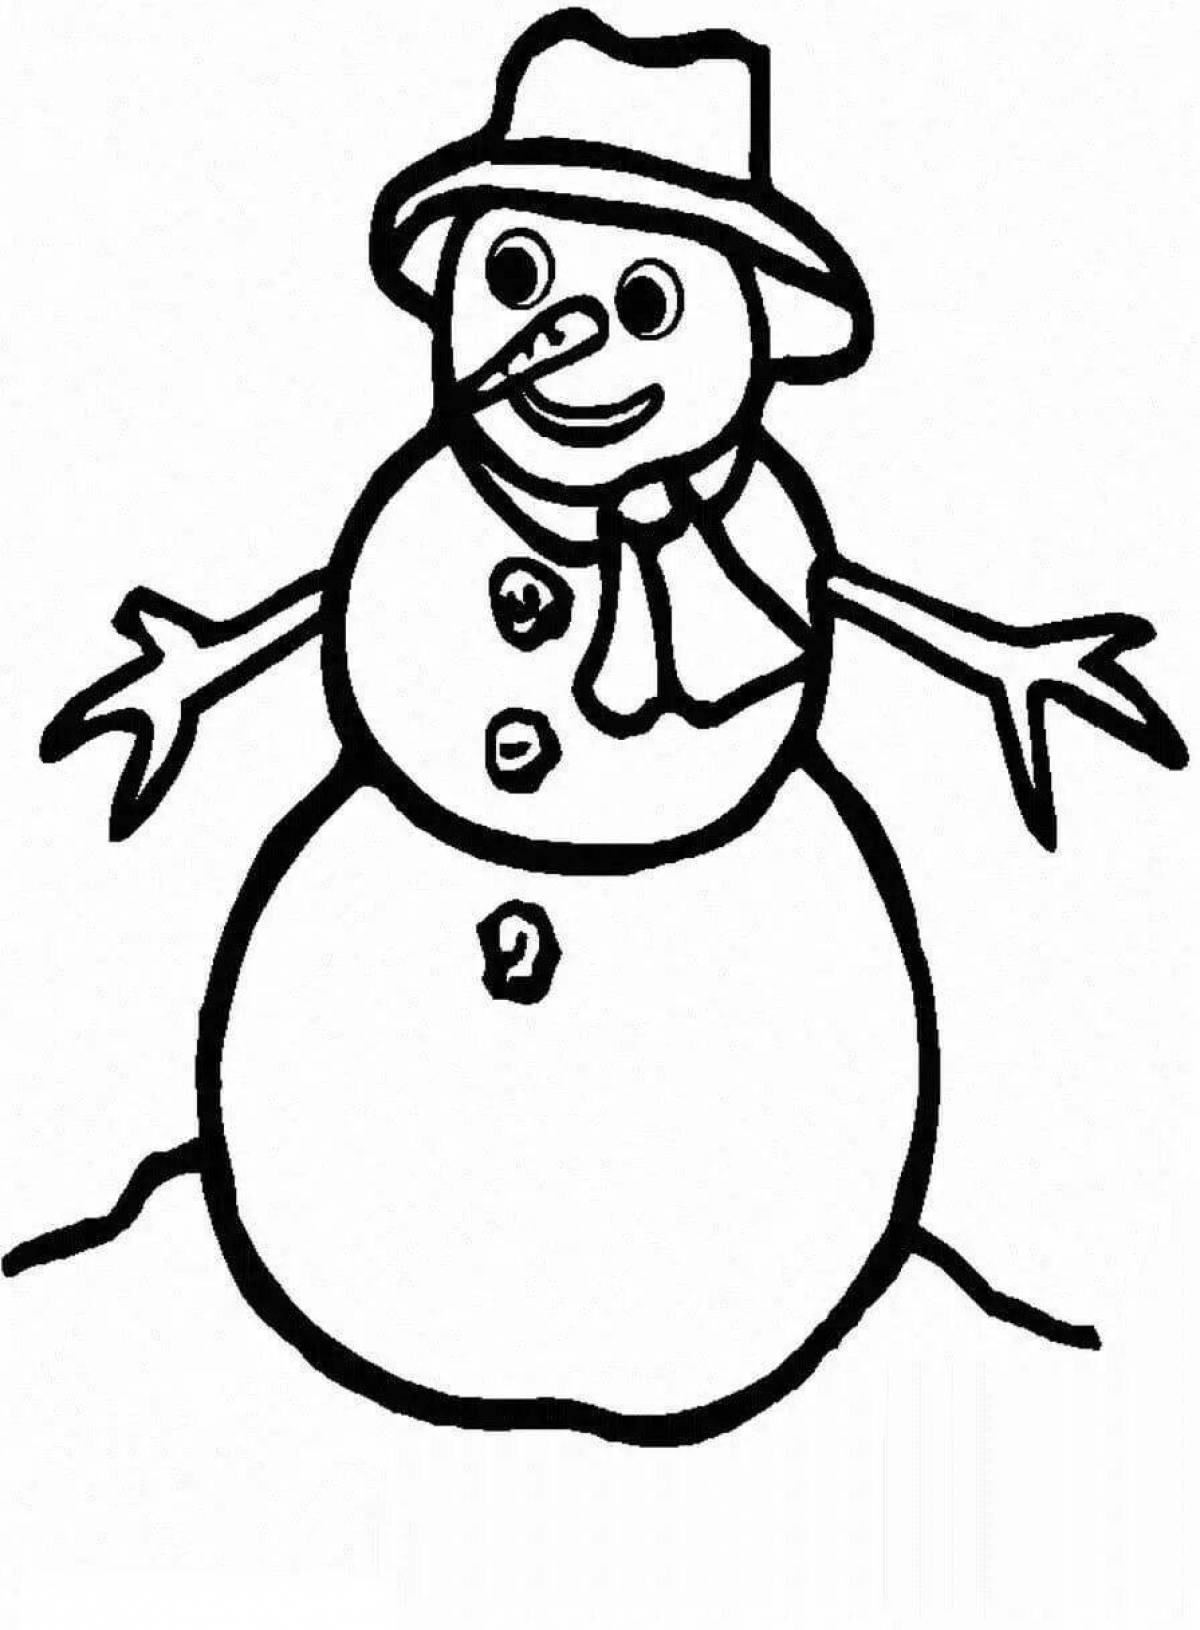 Great snowman coloring book for 5 year olds